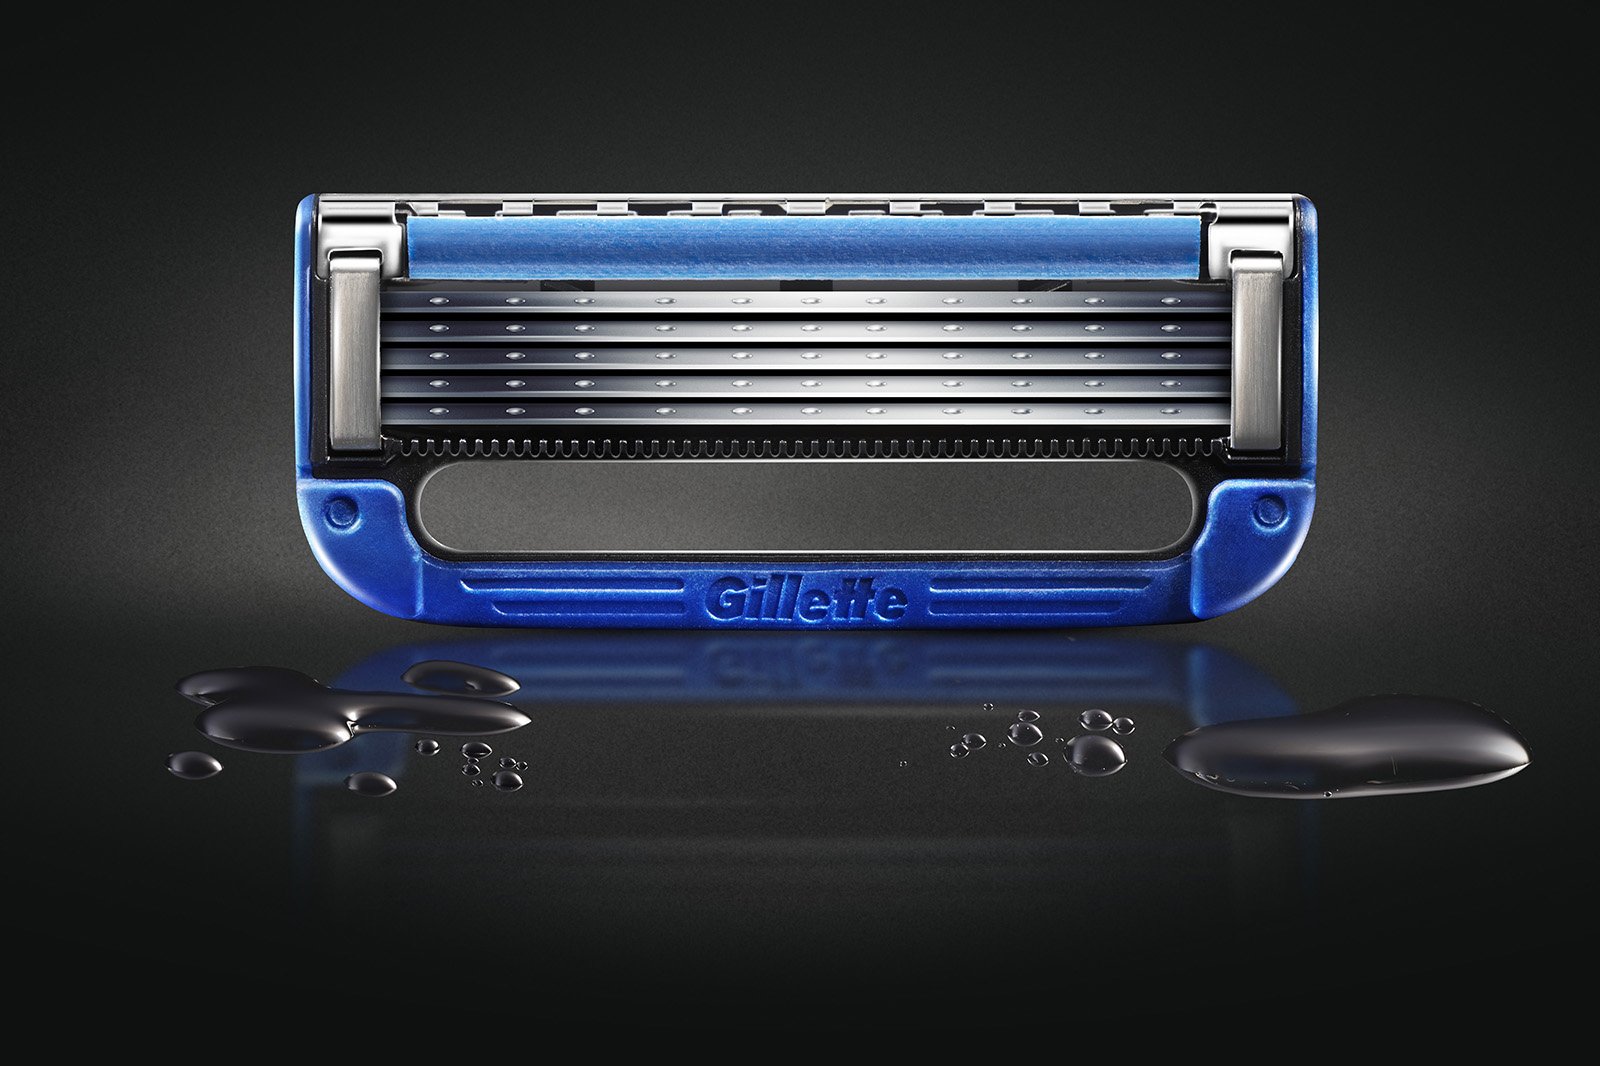 Gillette razor After photo retouching Image